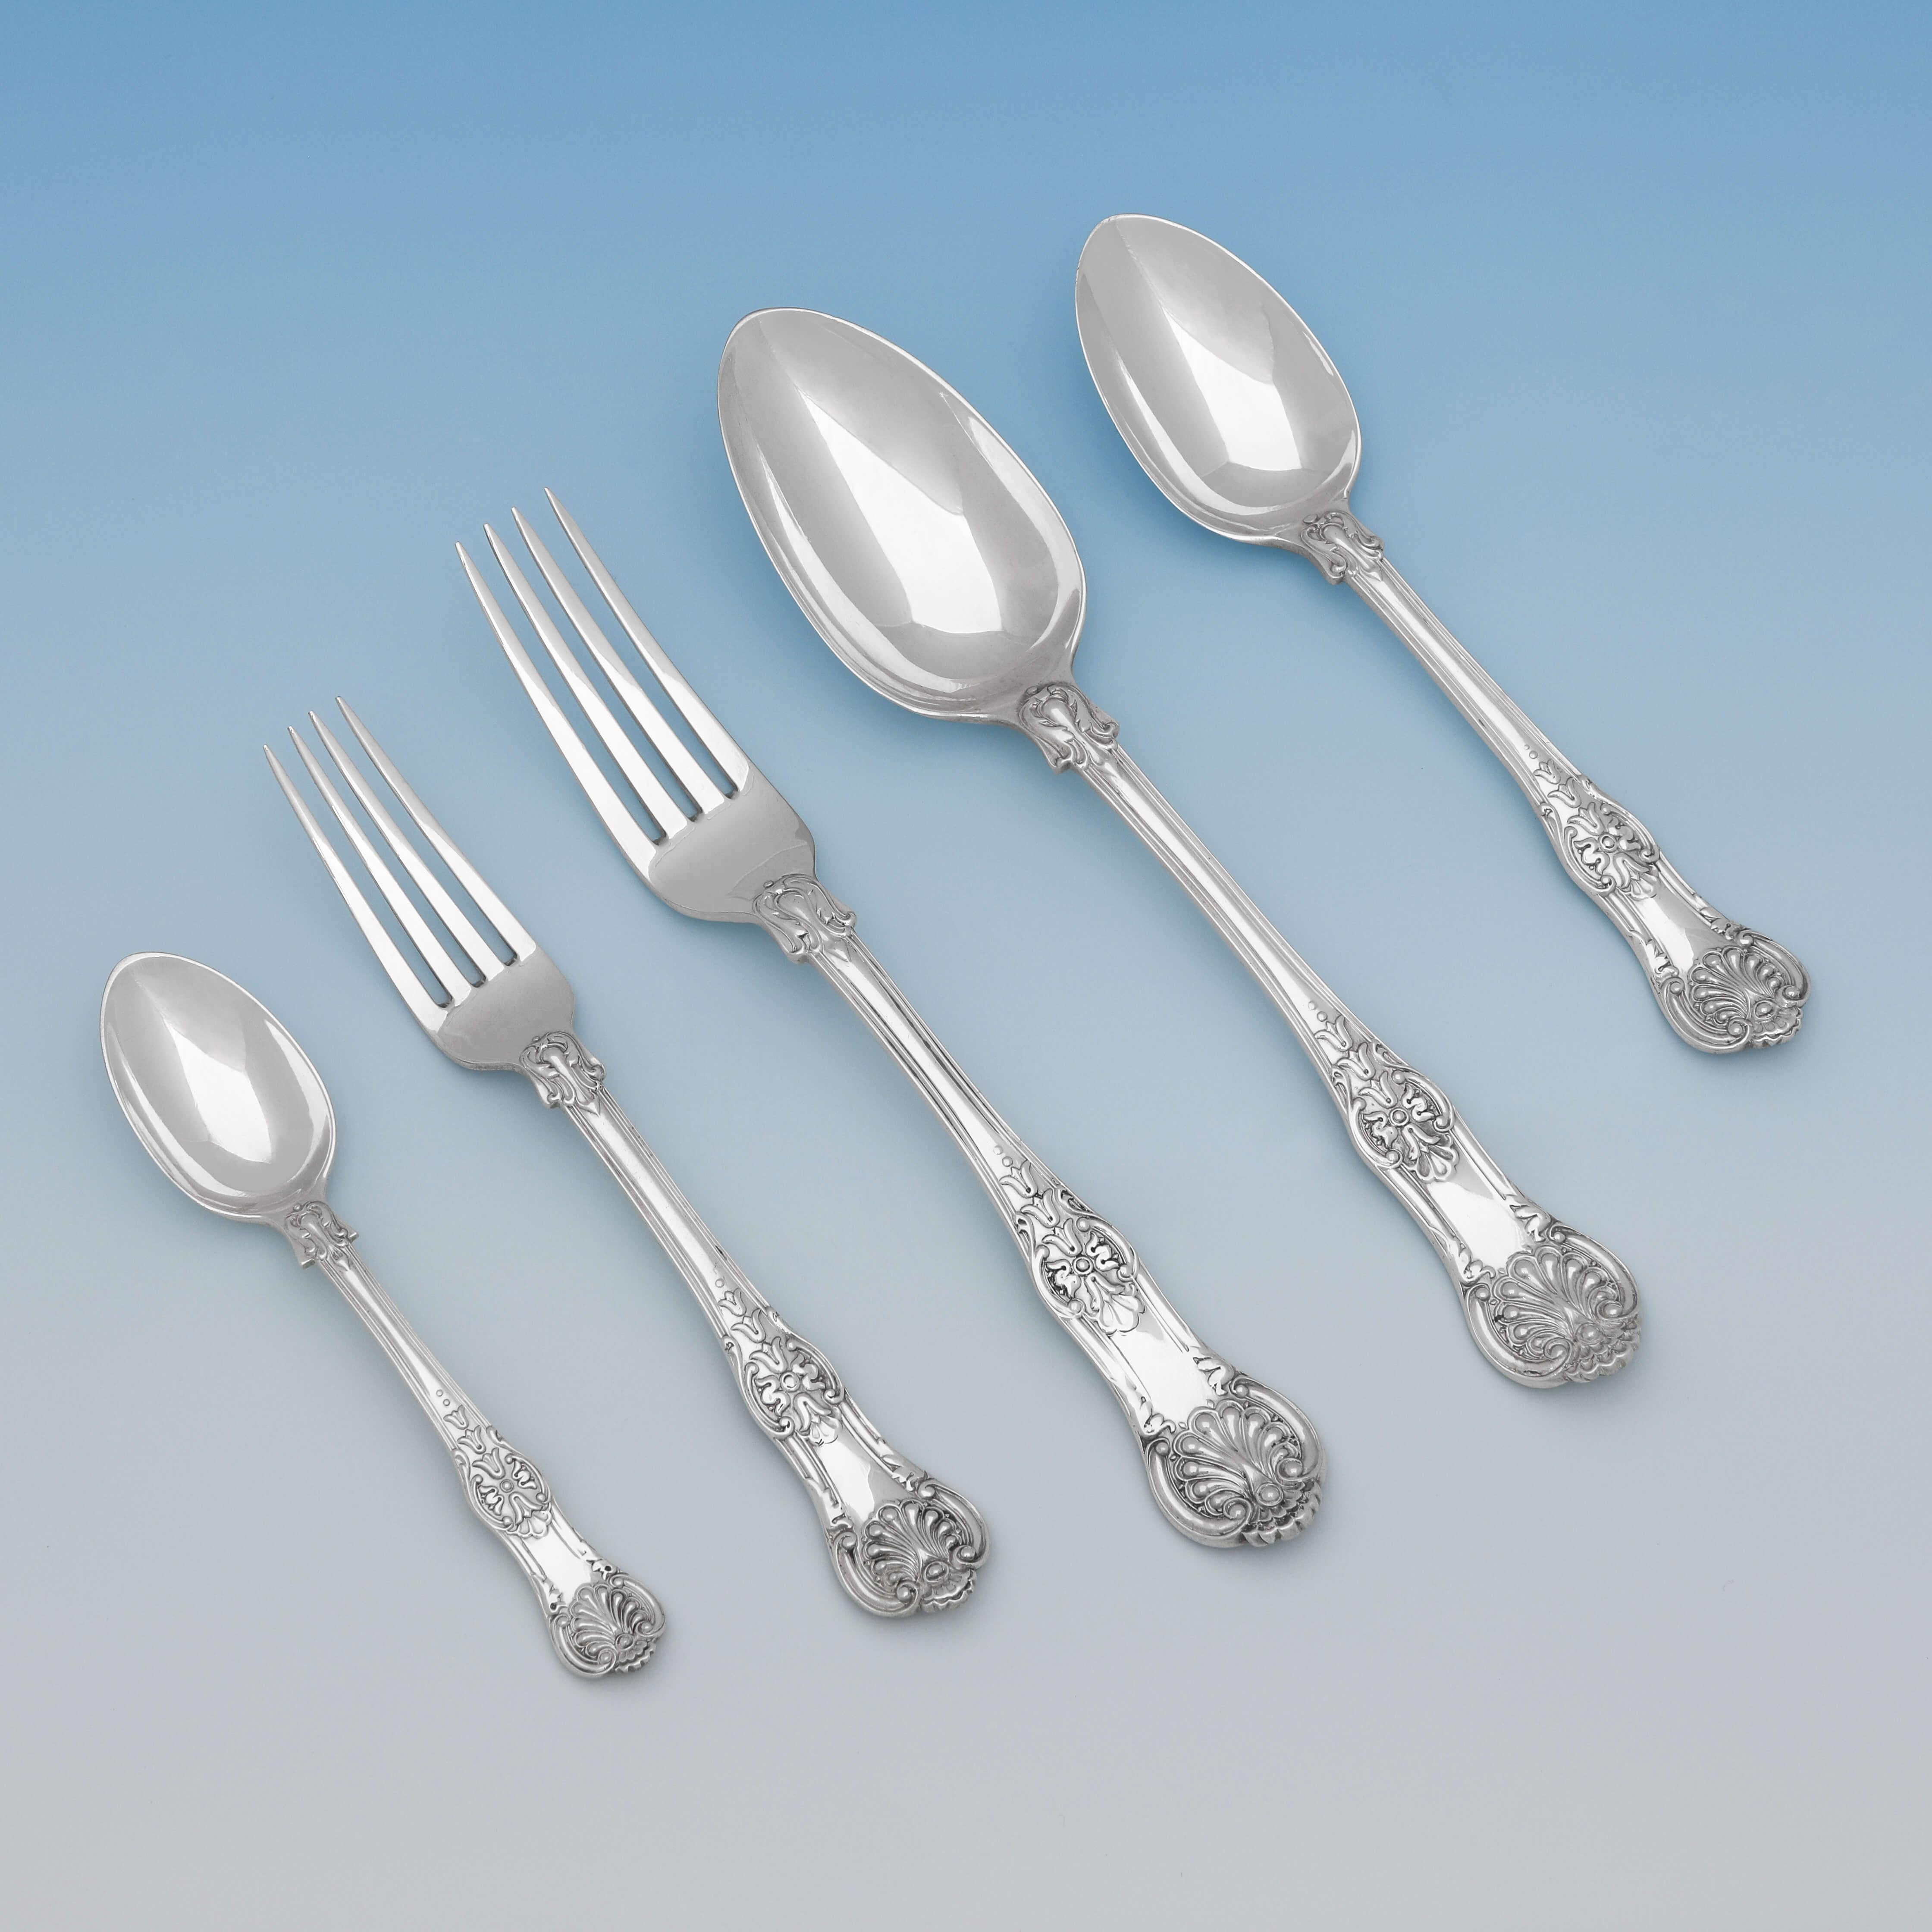 Baroque Antique English Sterling Silver Canteen of Cutlery / Flatware, Queens Rosette